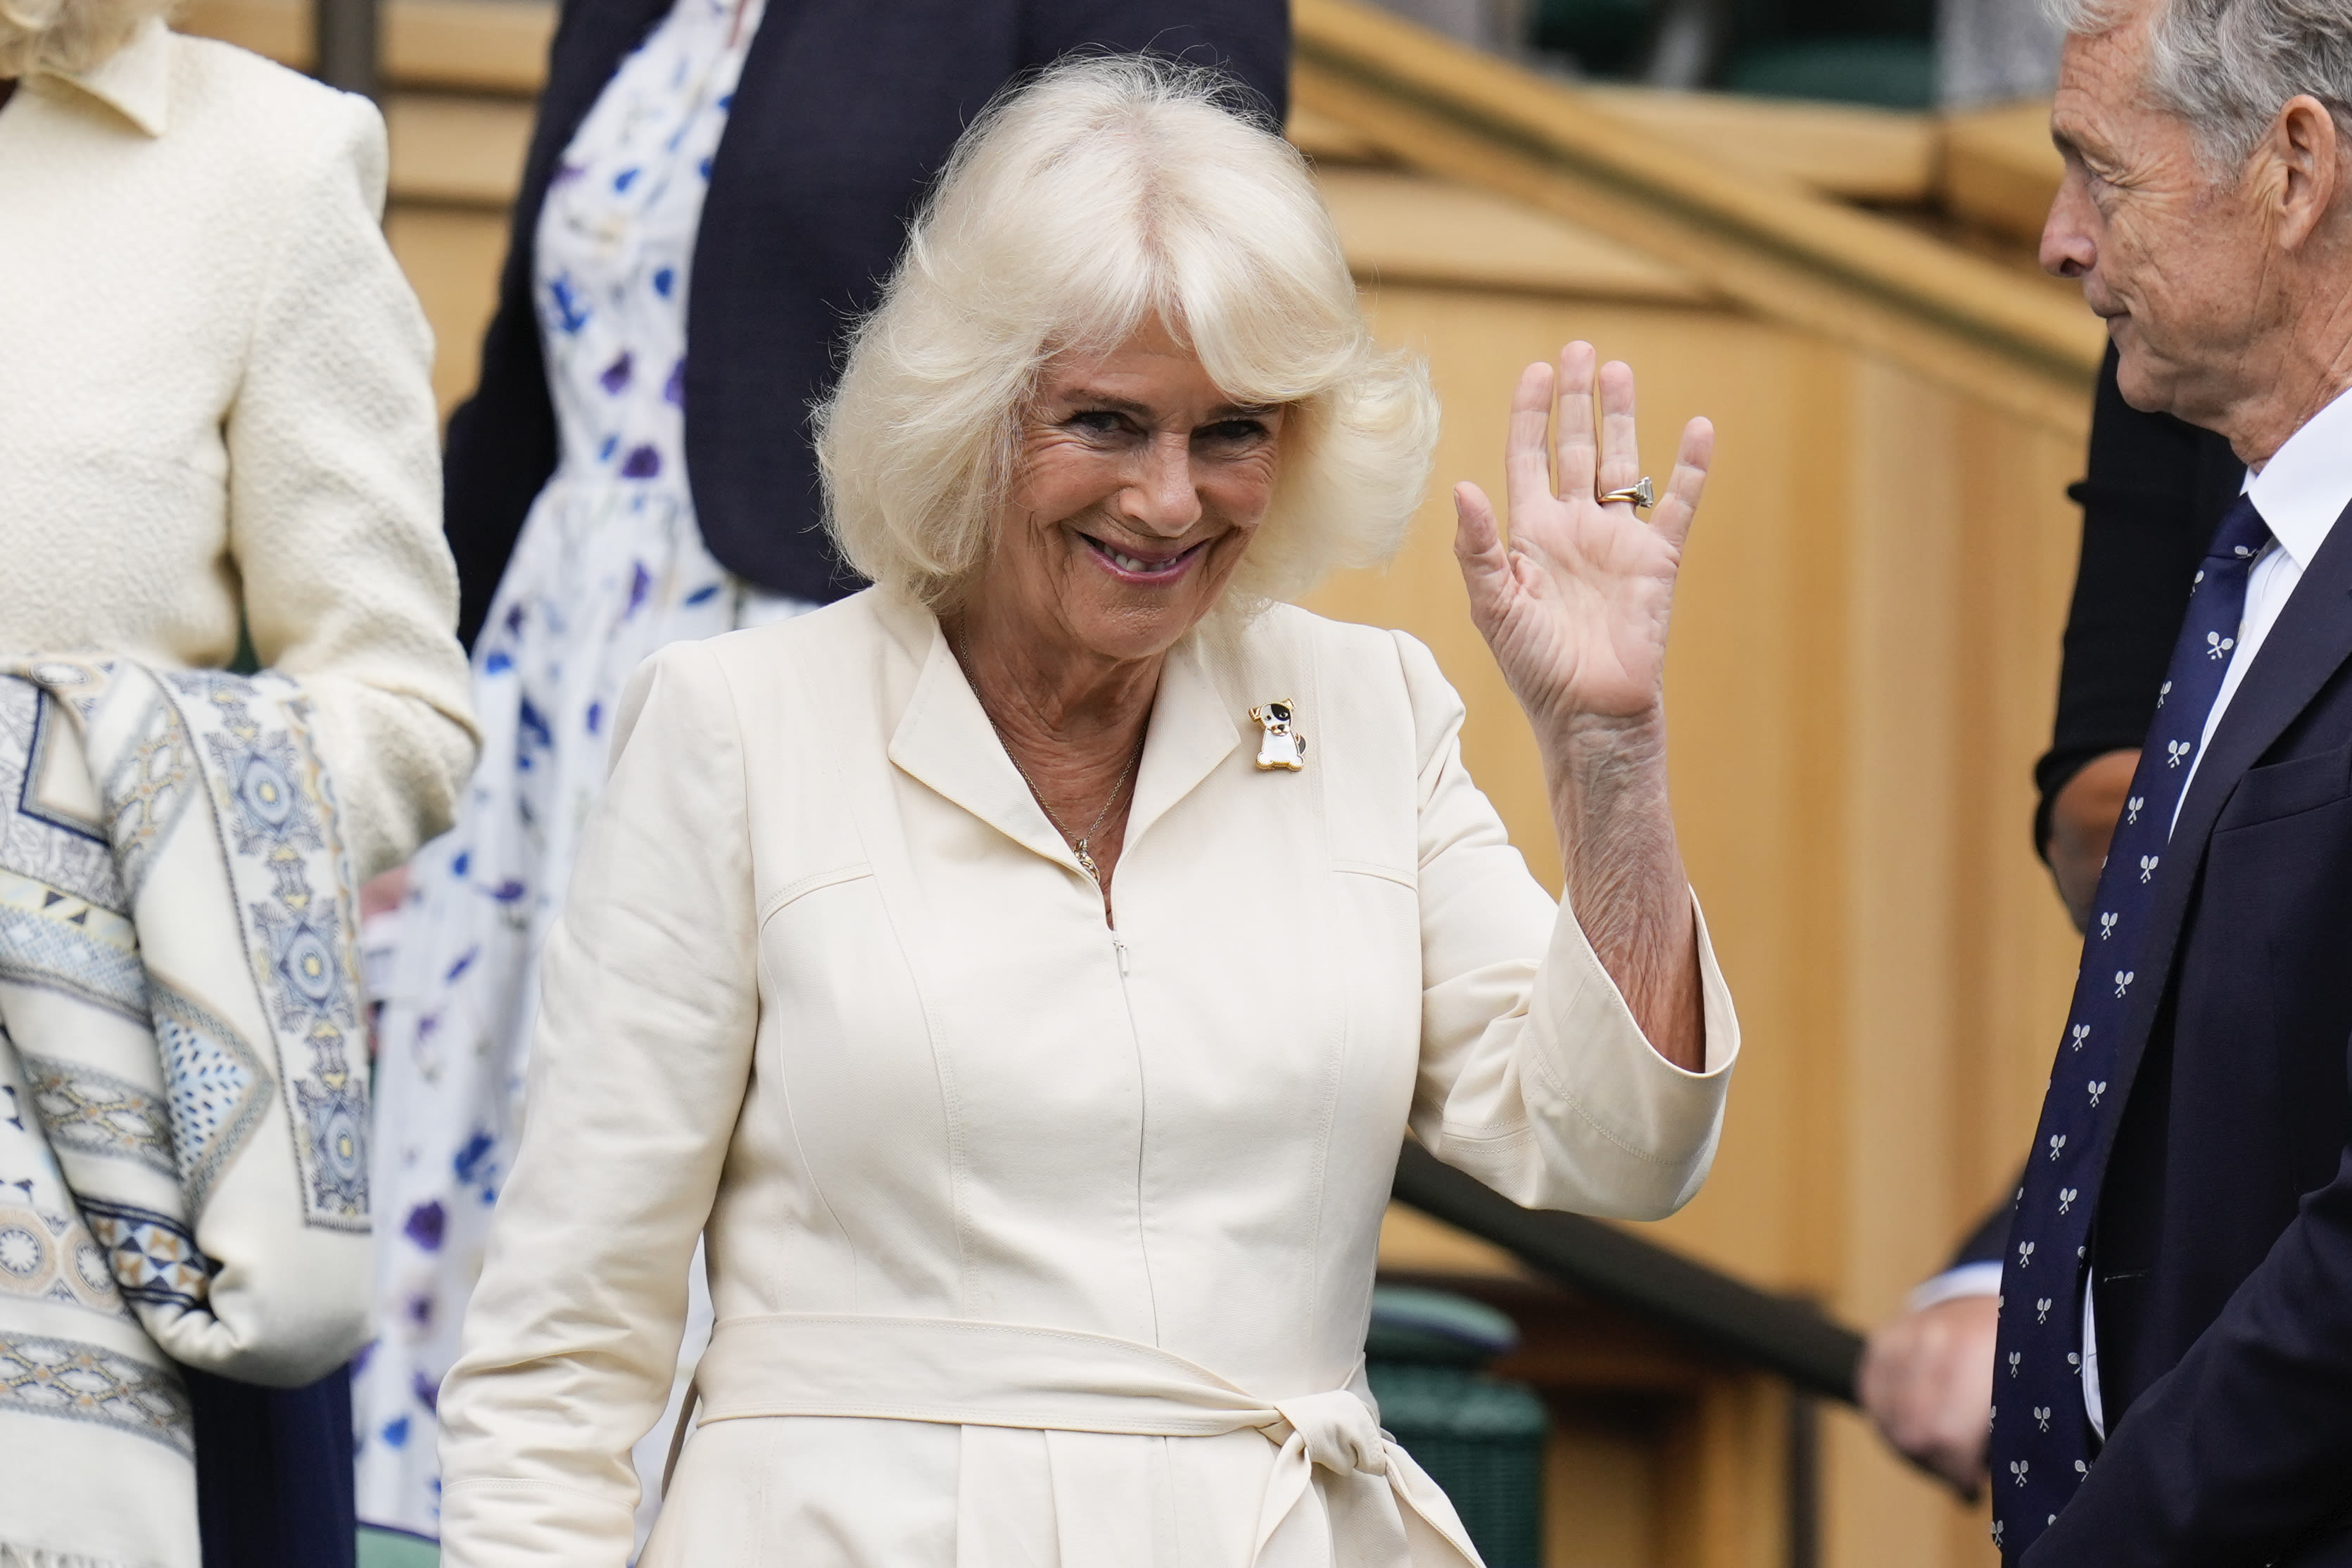 Queen Camilla visits Wimbledon and joins fans in doing 'the wave'